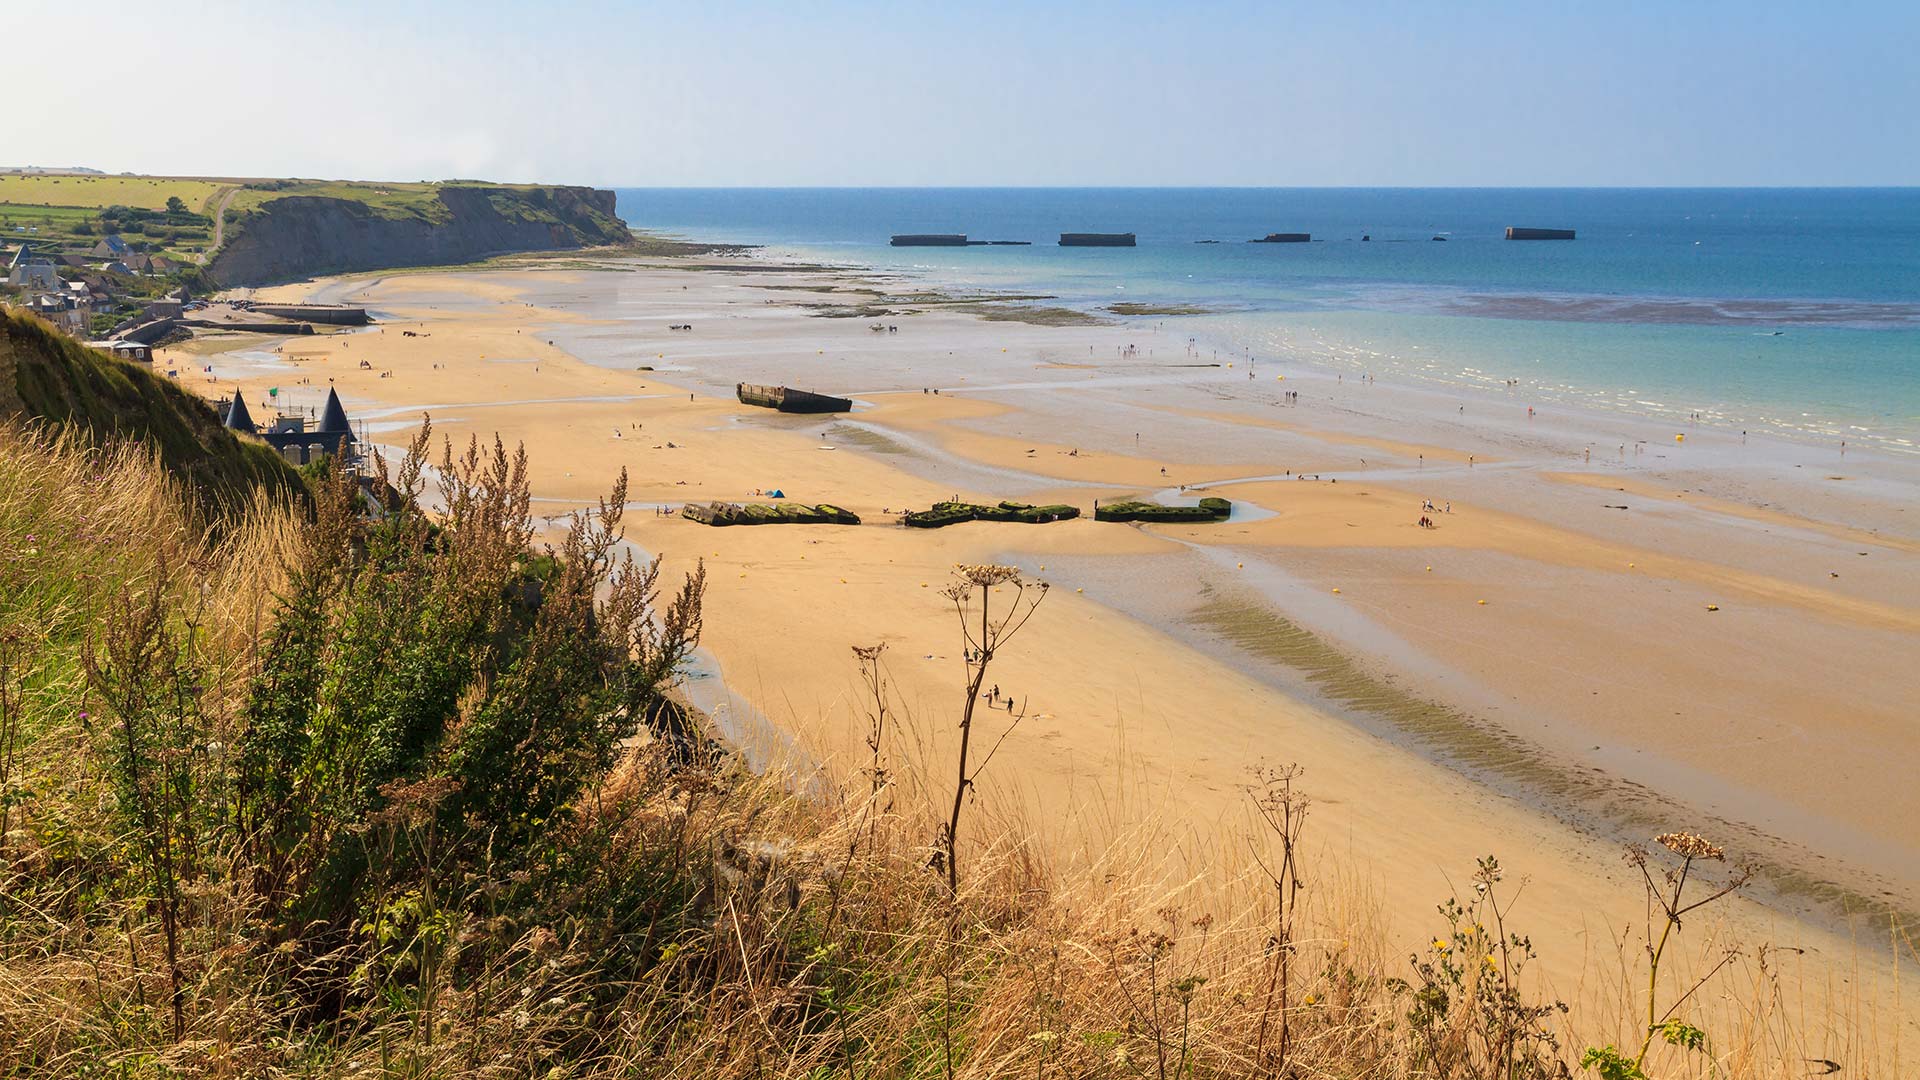 The D-Day landing beaches’ must-see sites